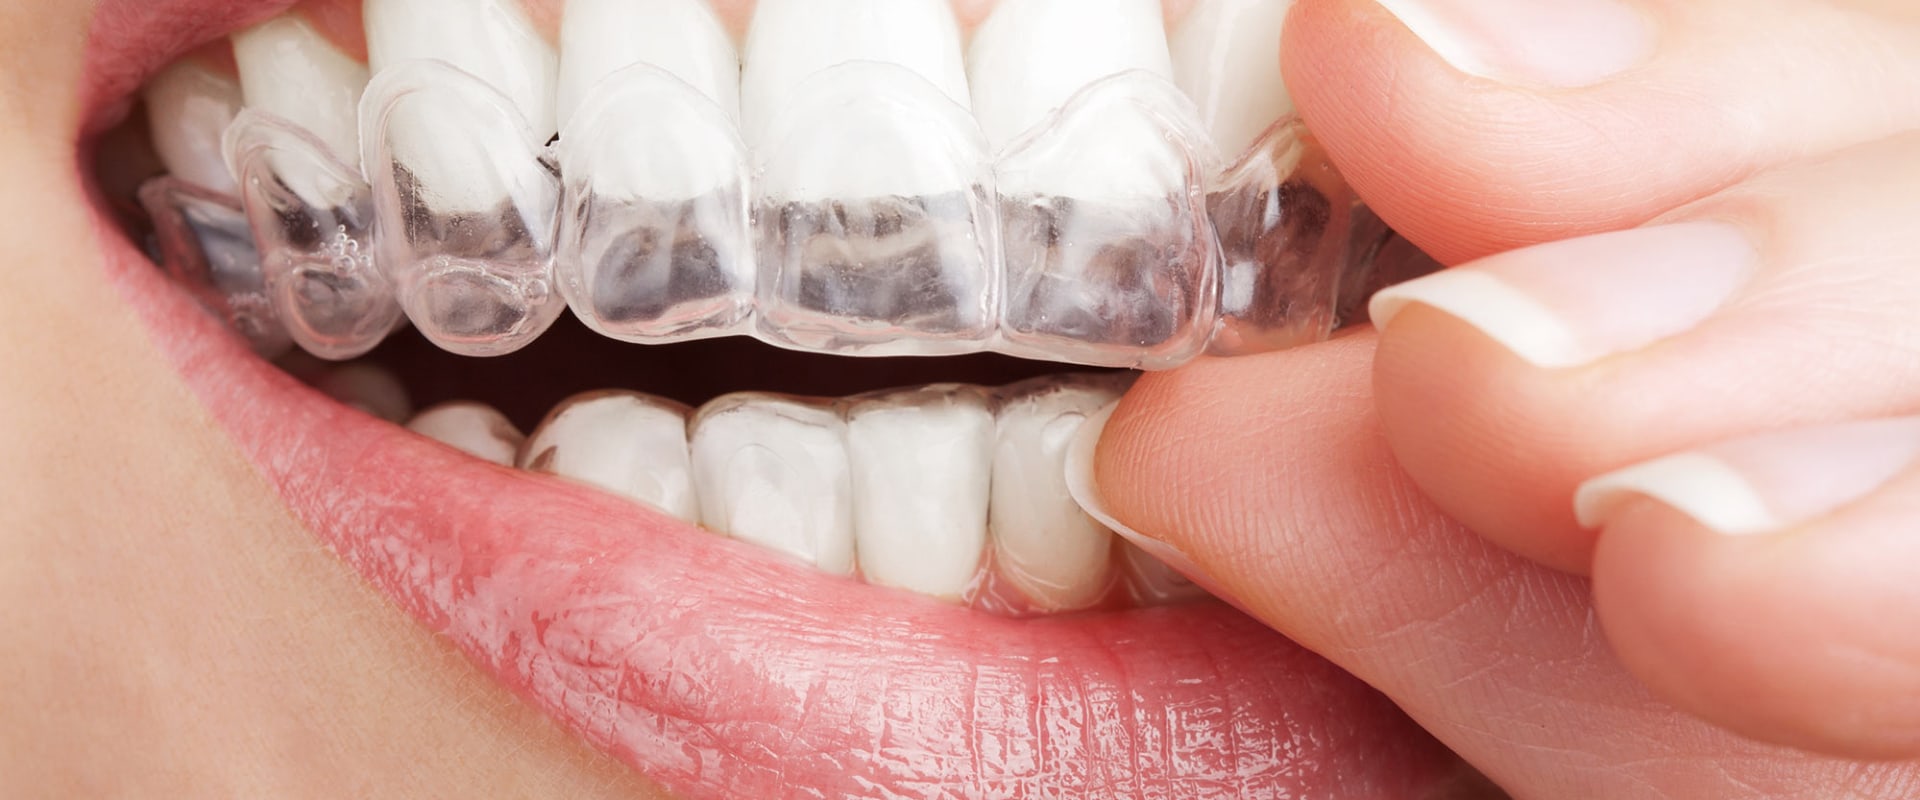 Why You Should Change Your Invisalign Trays Every Two Weeks